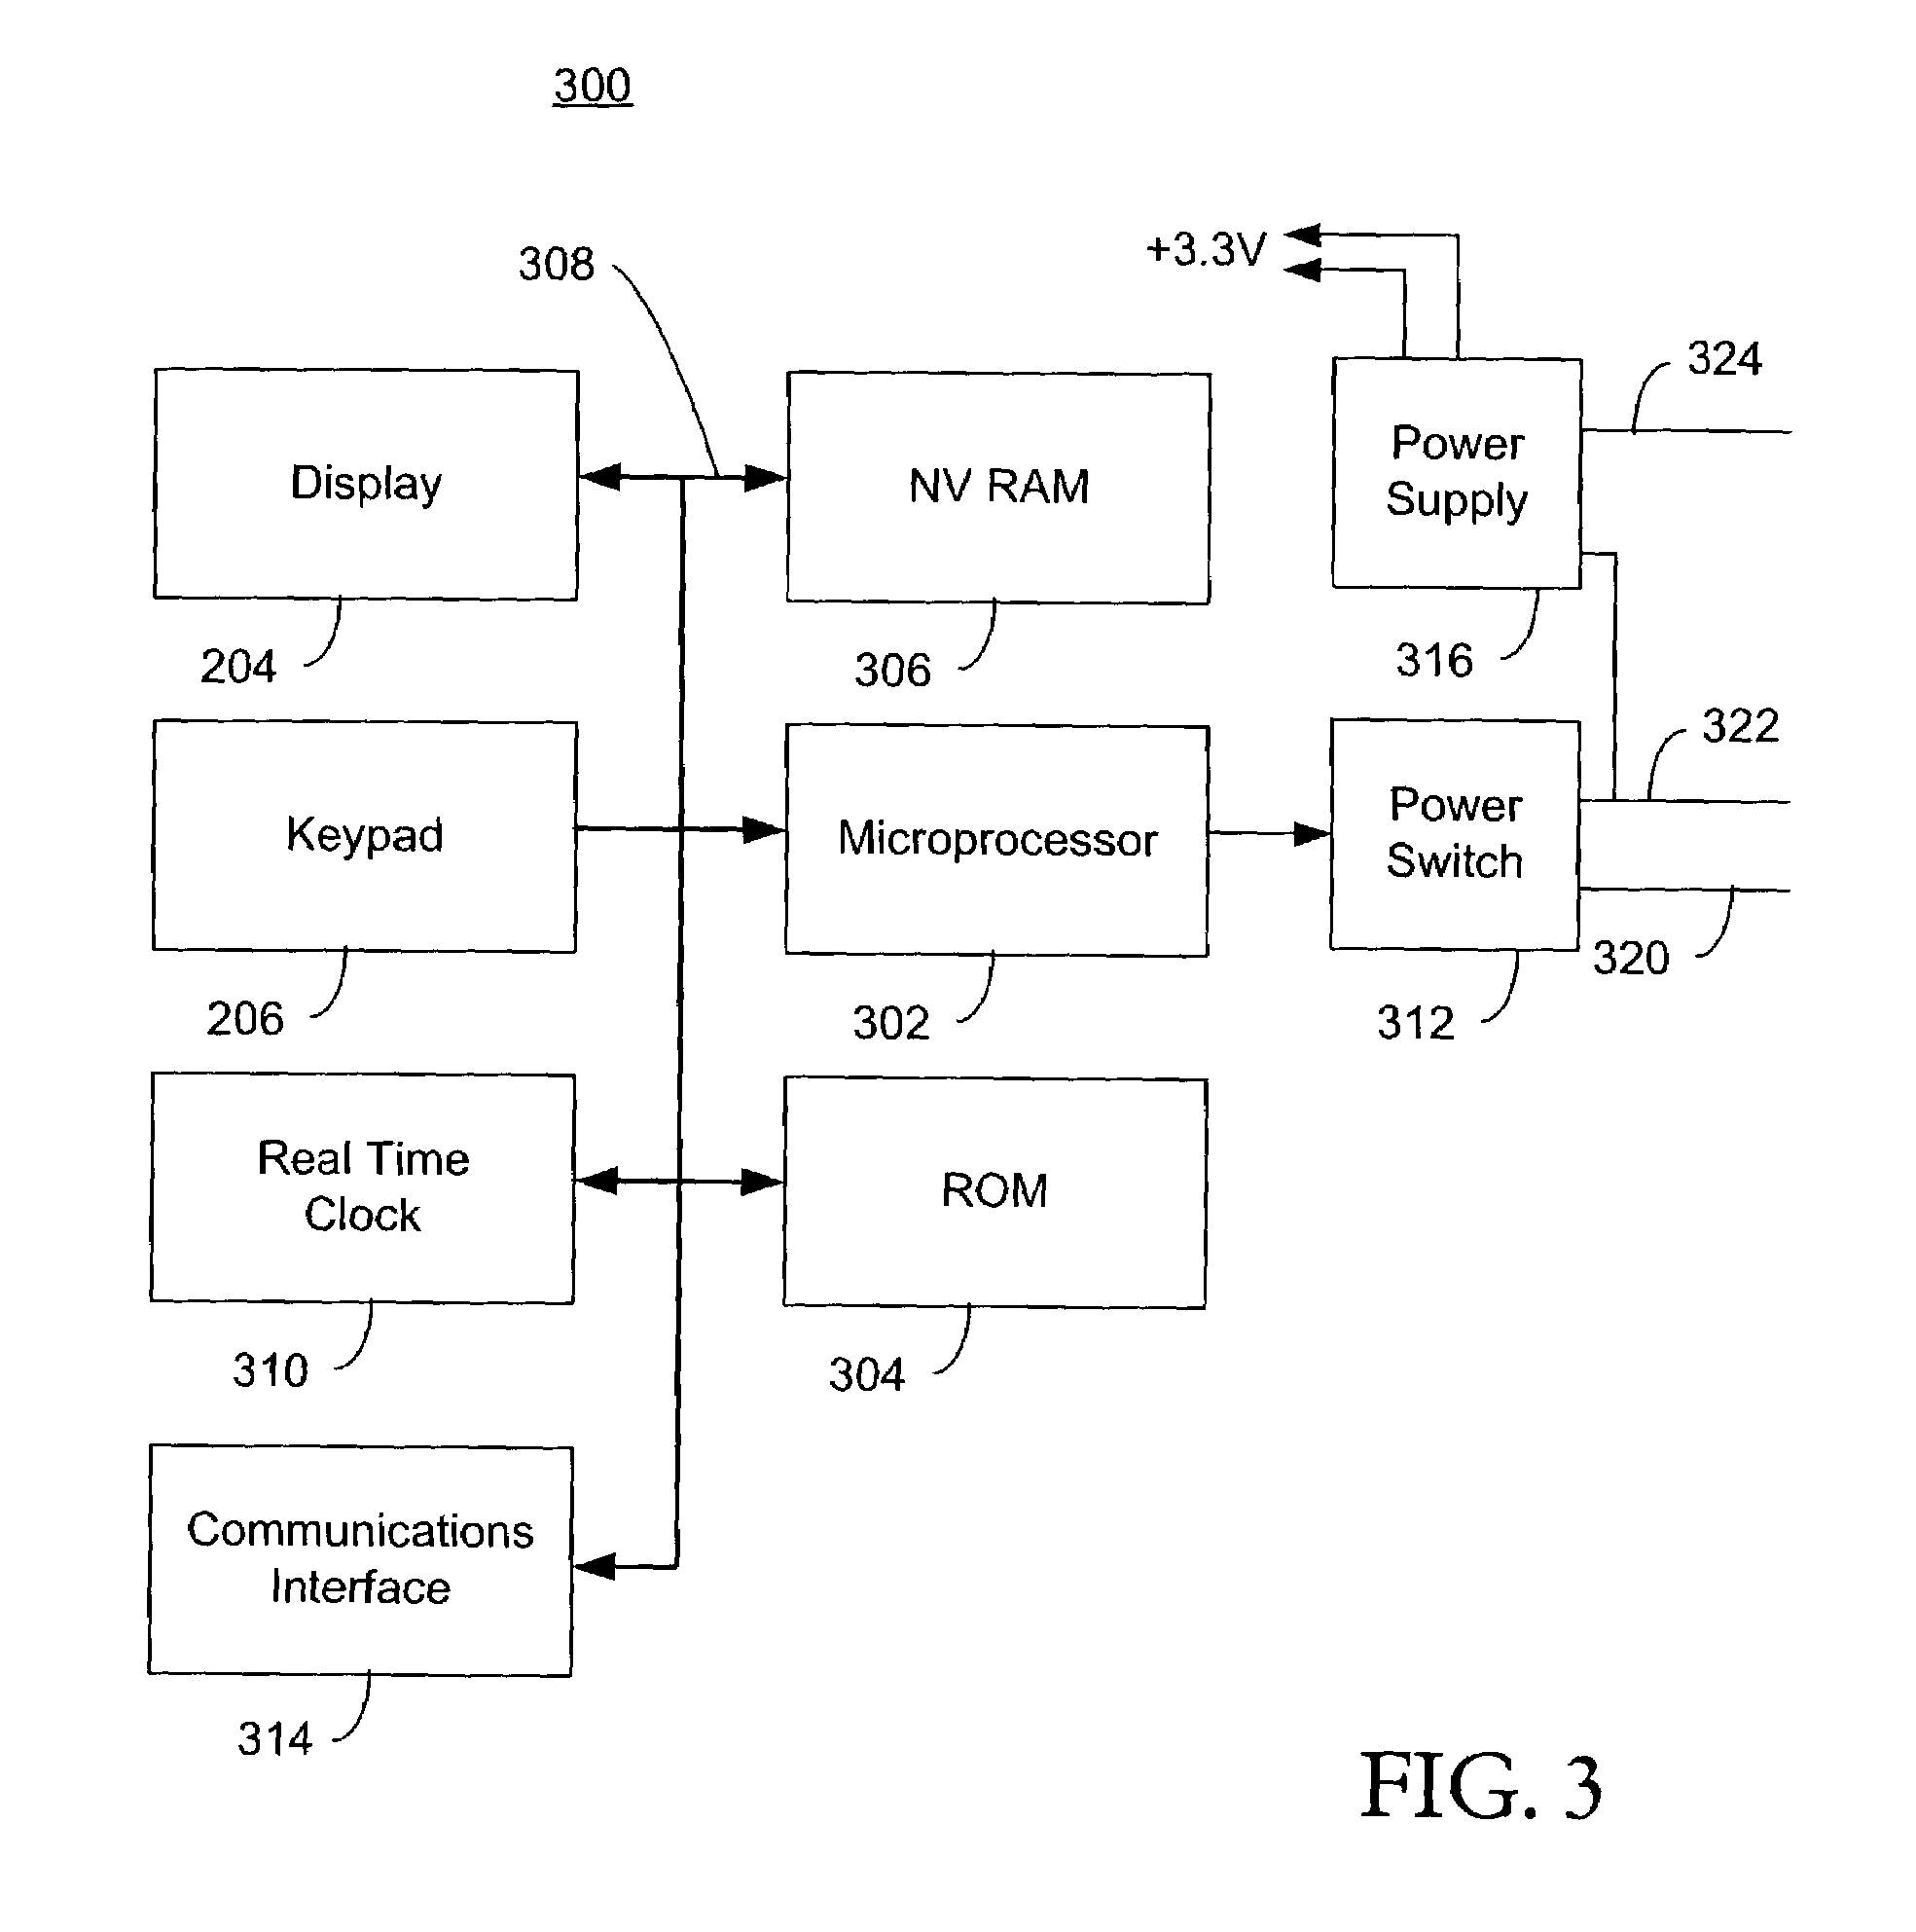 Method and system for controlling one or more apparatus based on a geographic location